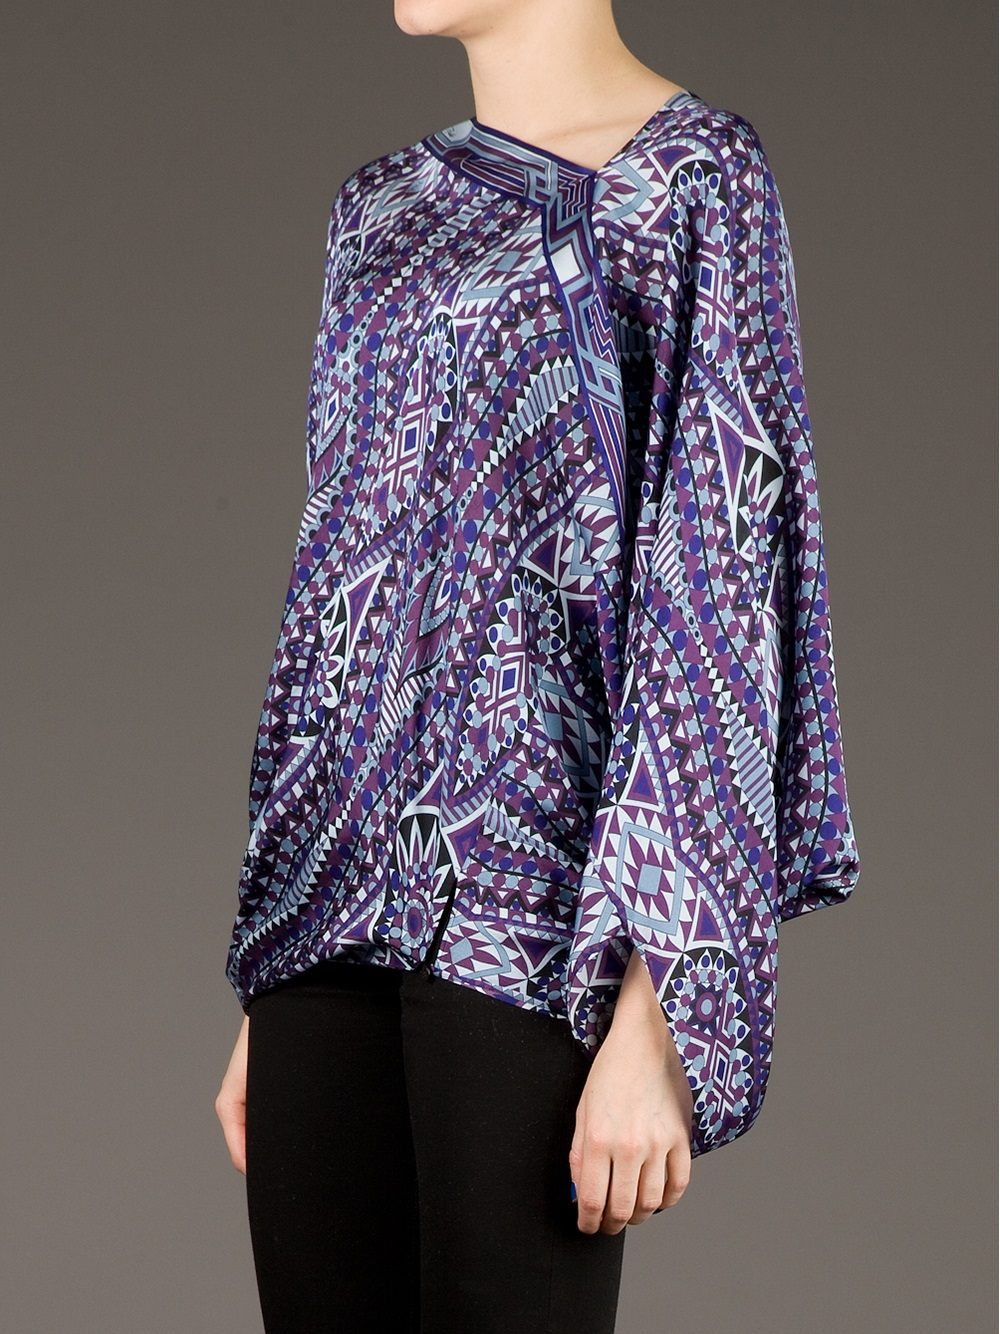 Emilio Pucci Poncho Style Blouse in Pink & Purple (Blue) - Lyst